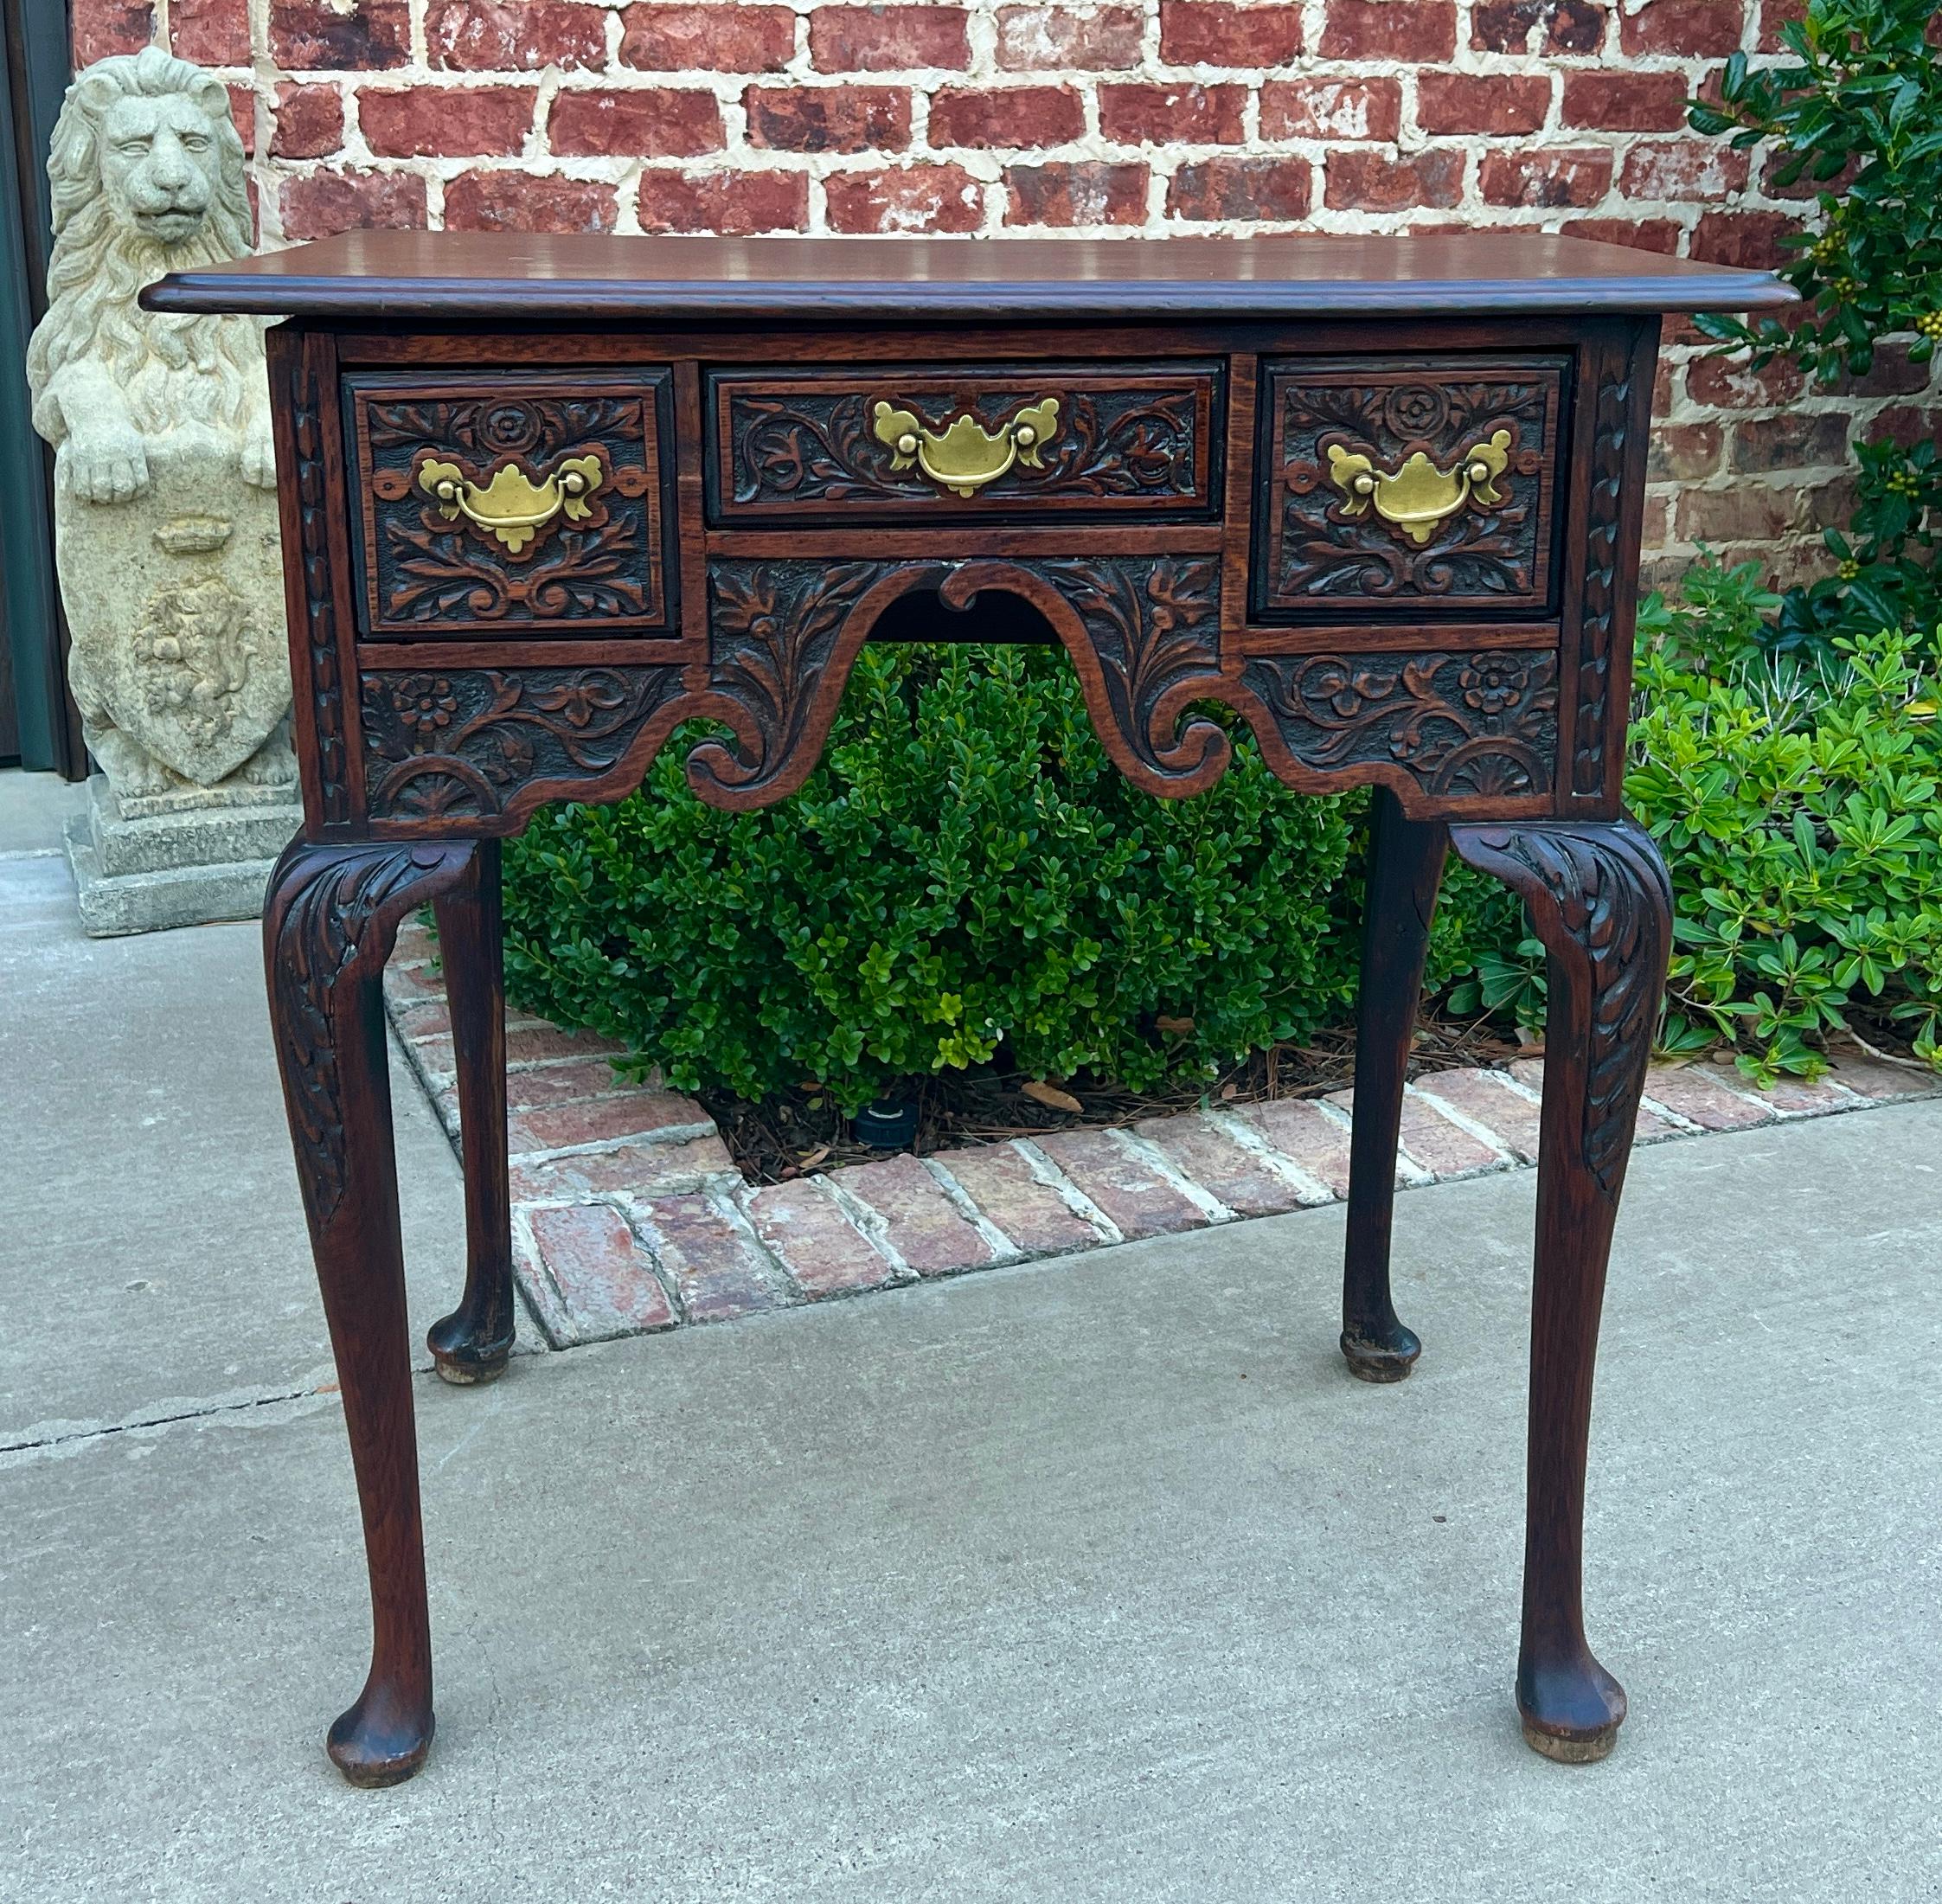 BEAUTIFUL  Antique English HIGHLY CARVED Oak Georgian Writing Desk, Table, Lowboy, or Nightstand with Drawers~~PETITE SIZE~~c. early 19th Century


So versatile~~could be used as an end table or entry hall table, nightstand or small writing